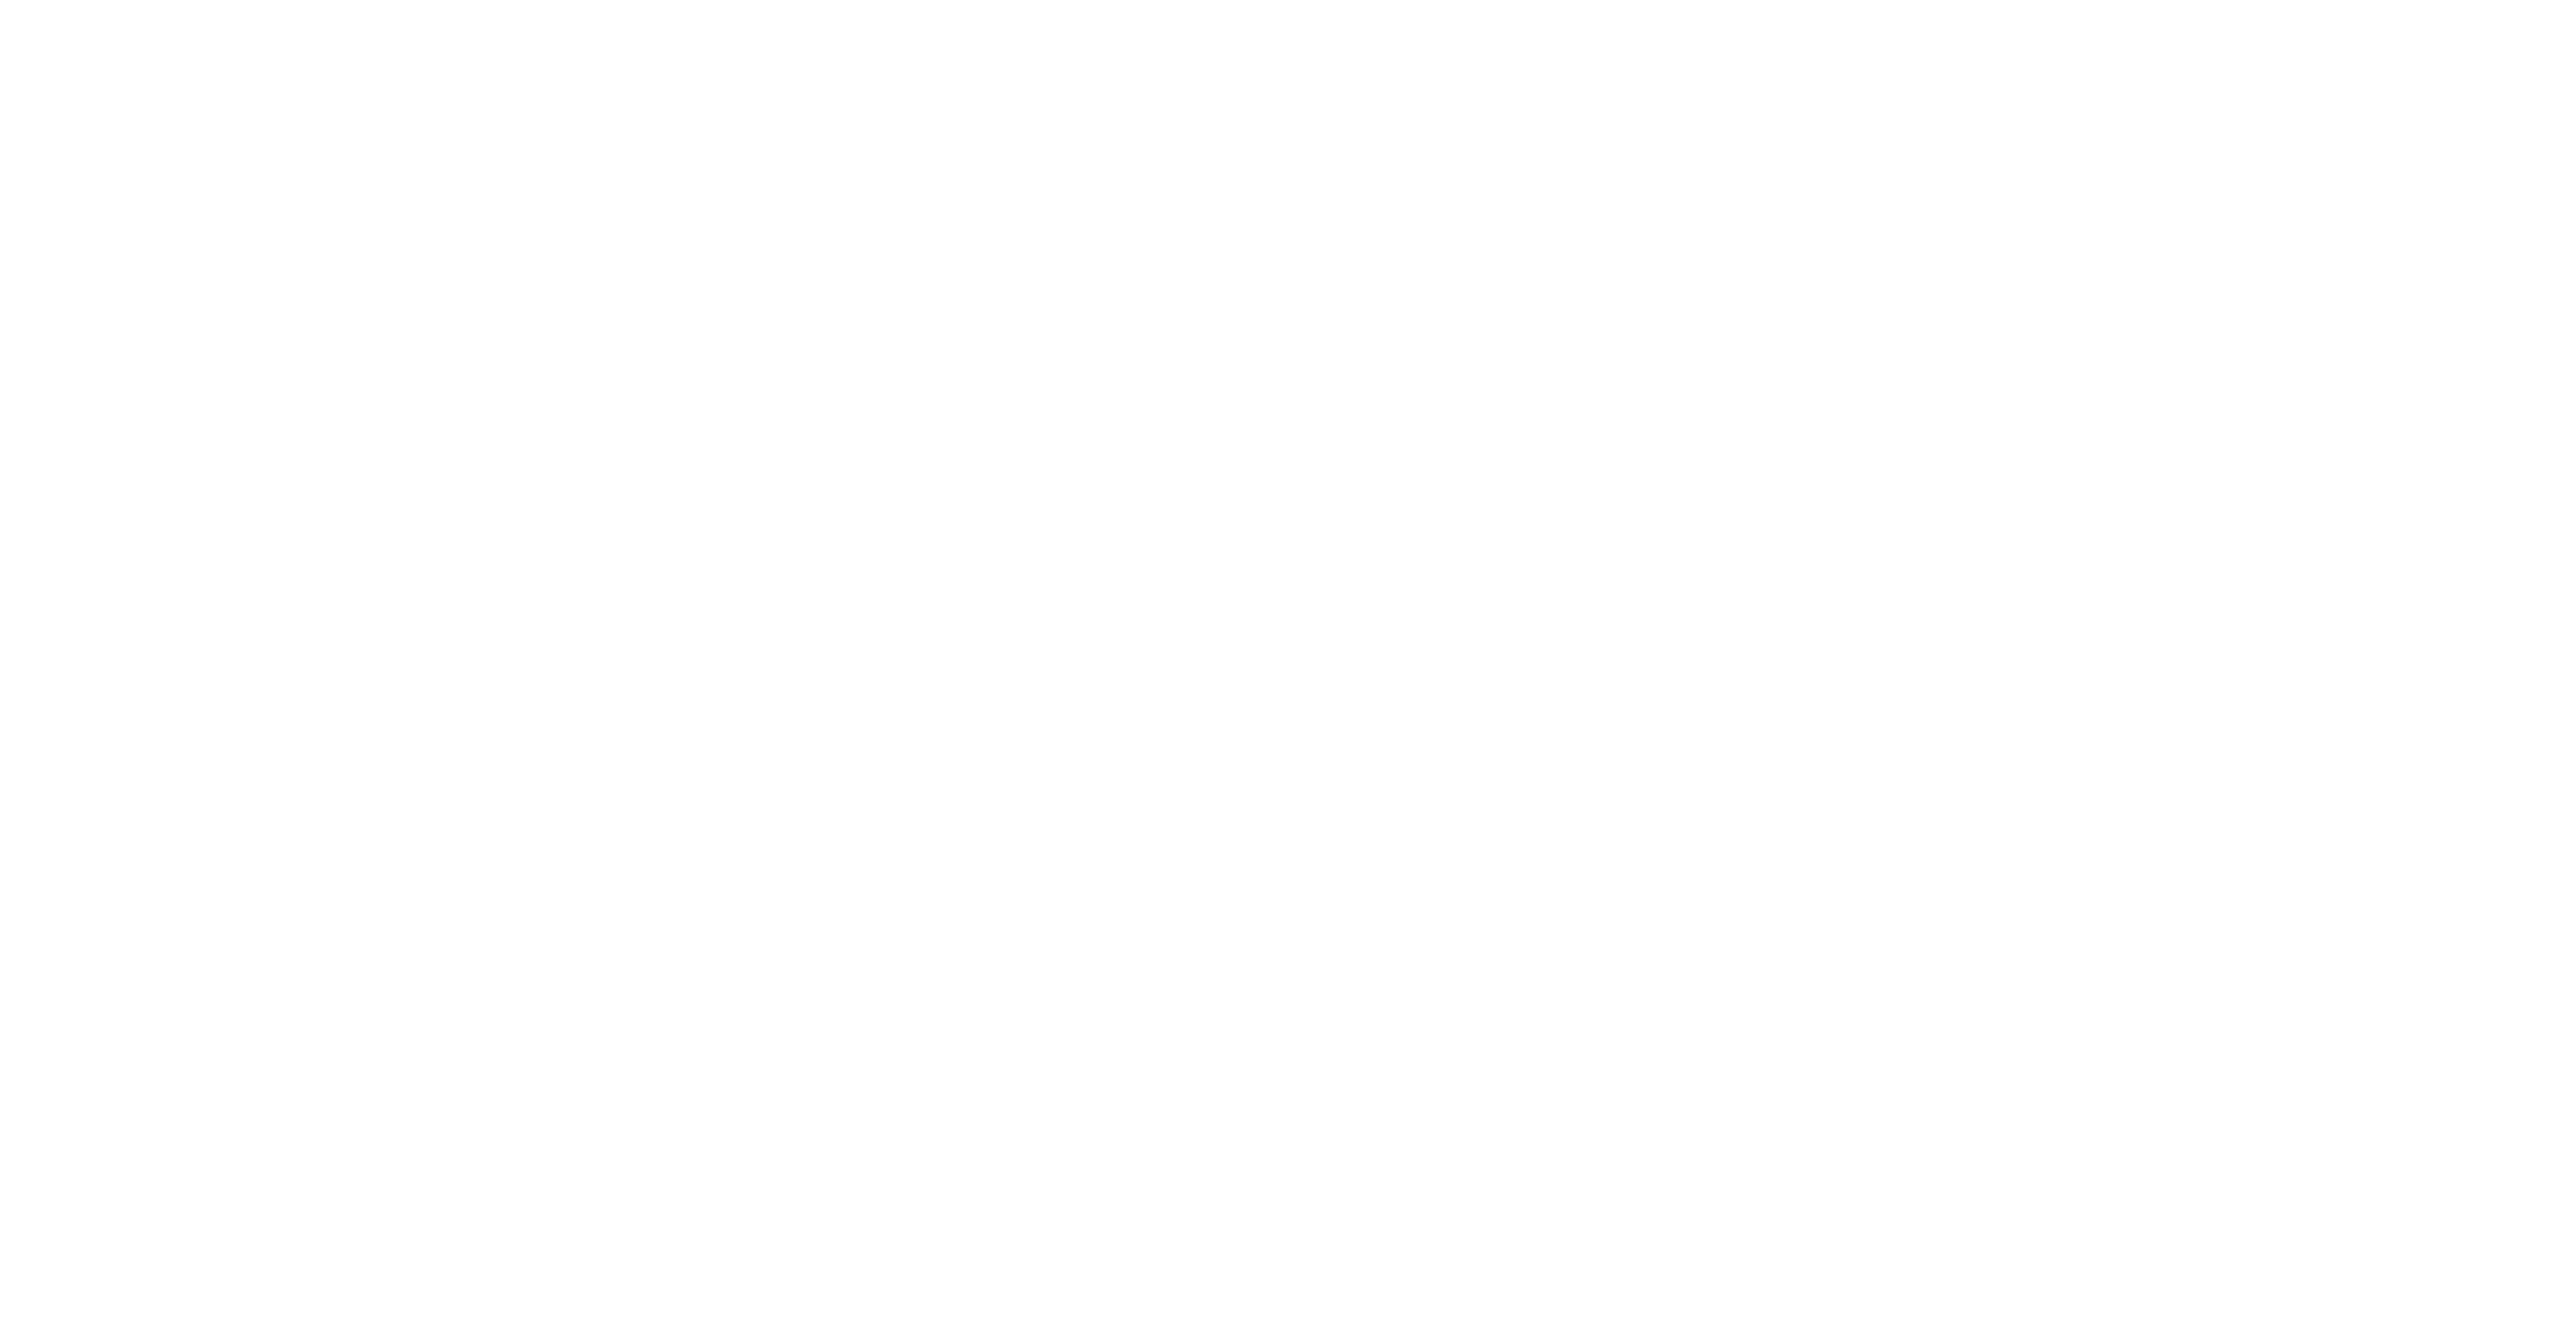 The Wadworth logo, with a brewery icon at the top. Underneath, "Wadworth, brewed in Wiltshire since 1875" is written.